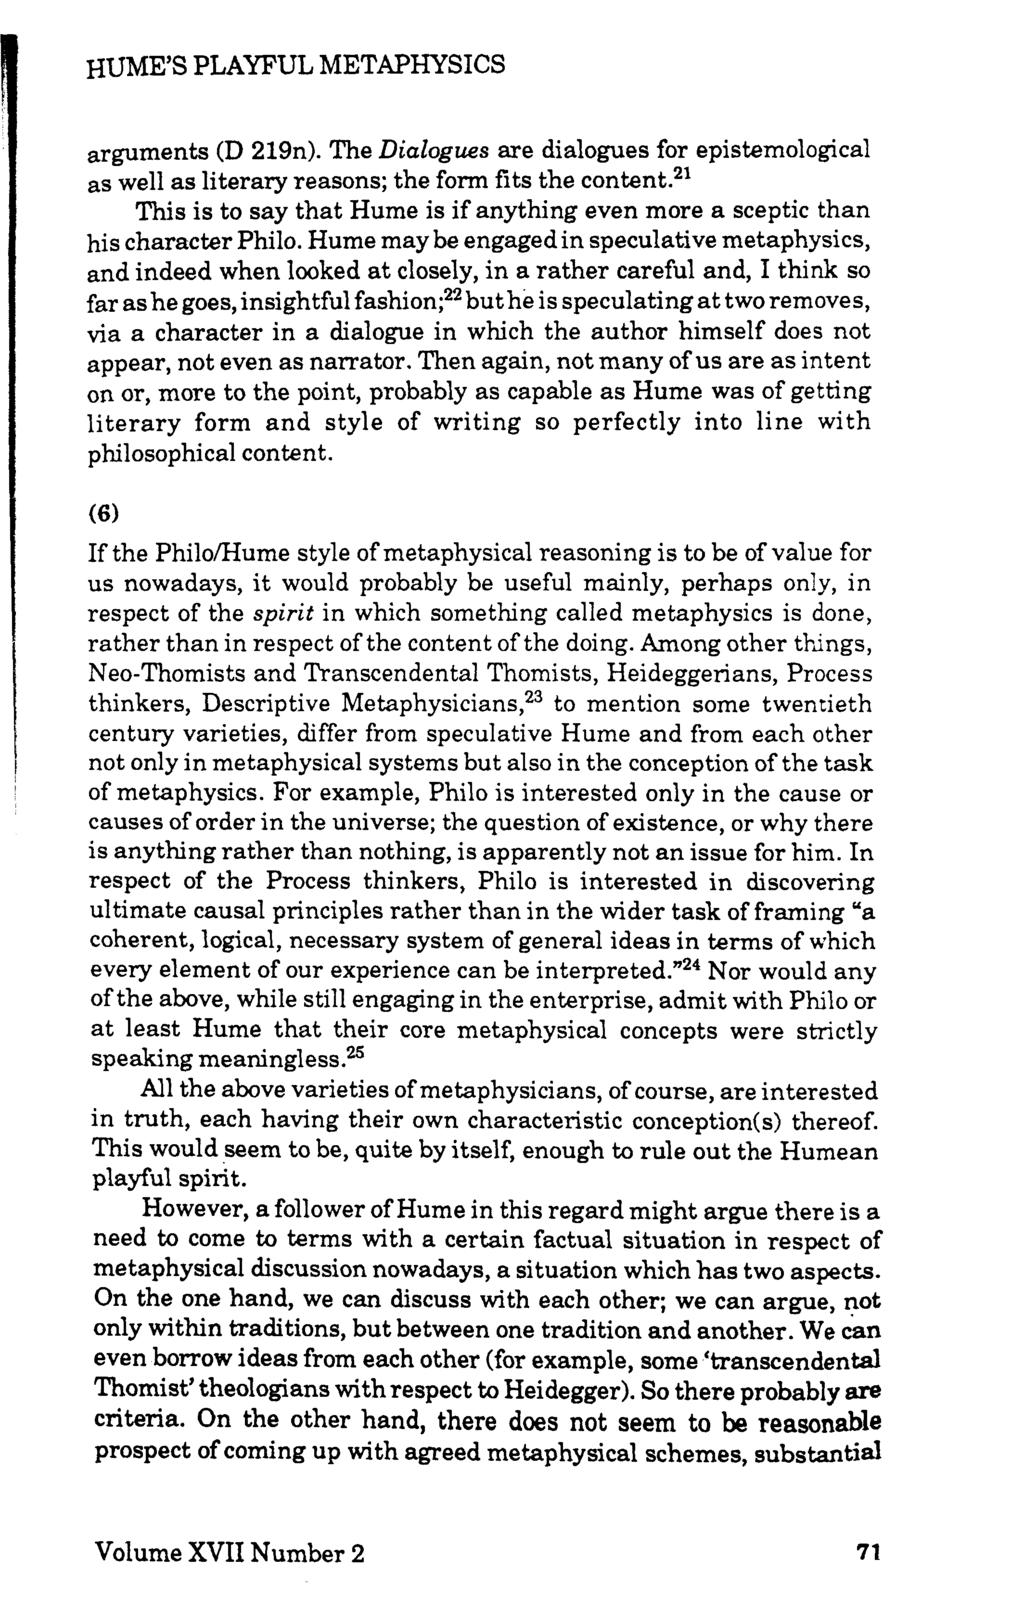 HUME'S PLAYFUL METAPHYSICS arguments (D 21911). The Dialogues are dialogues for epistemological as well as literary reasons; the form fits the content.